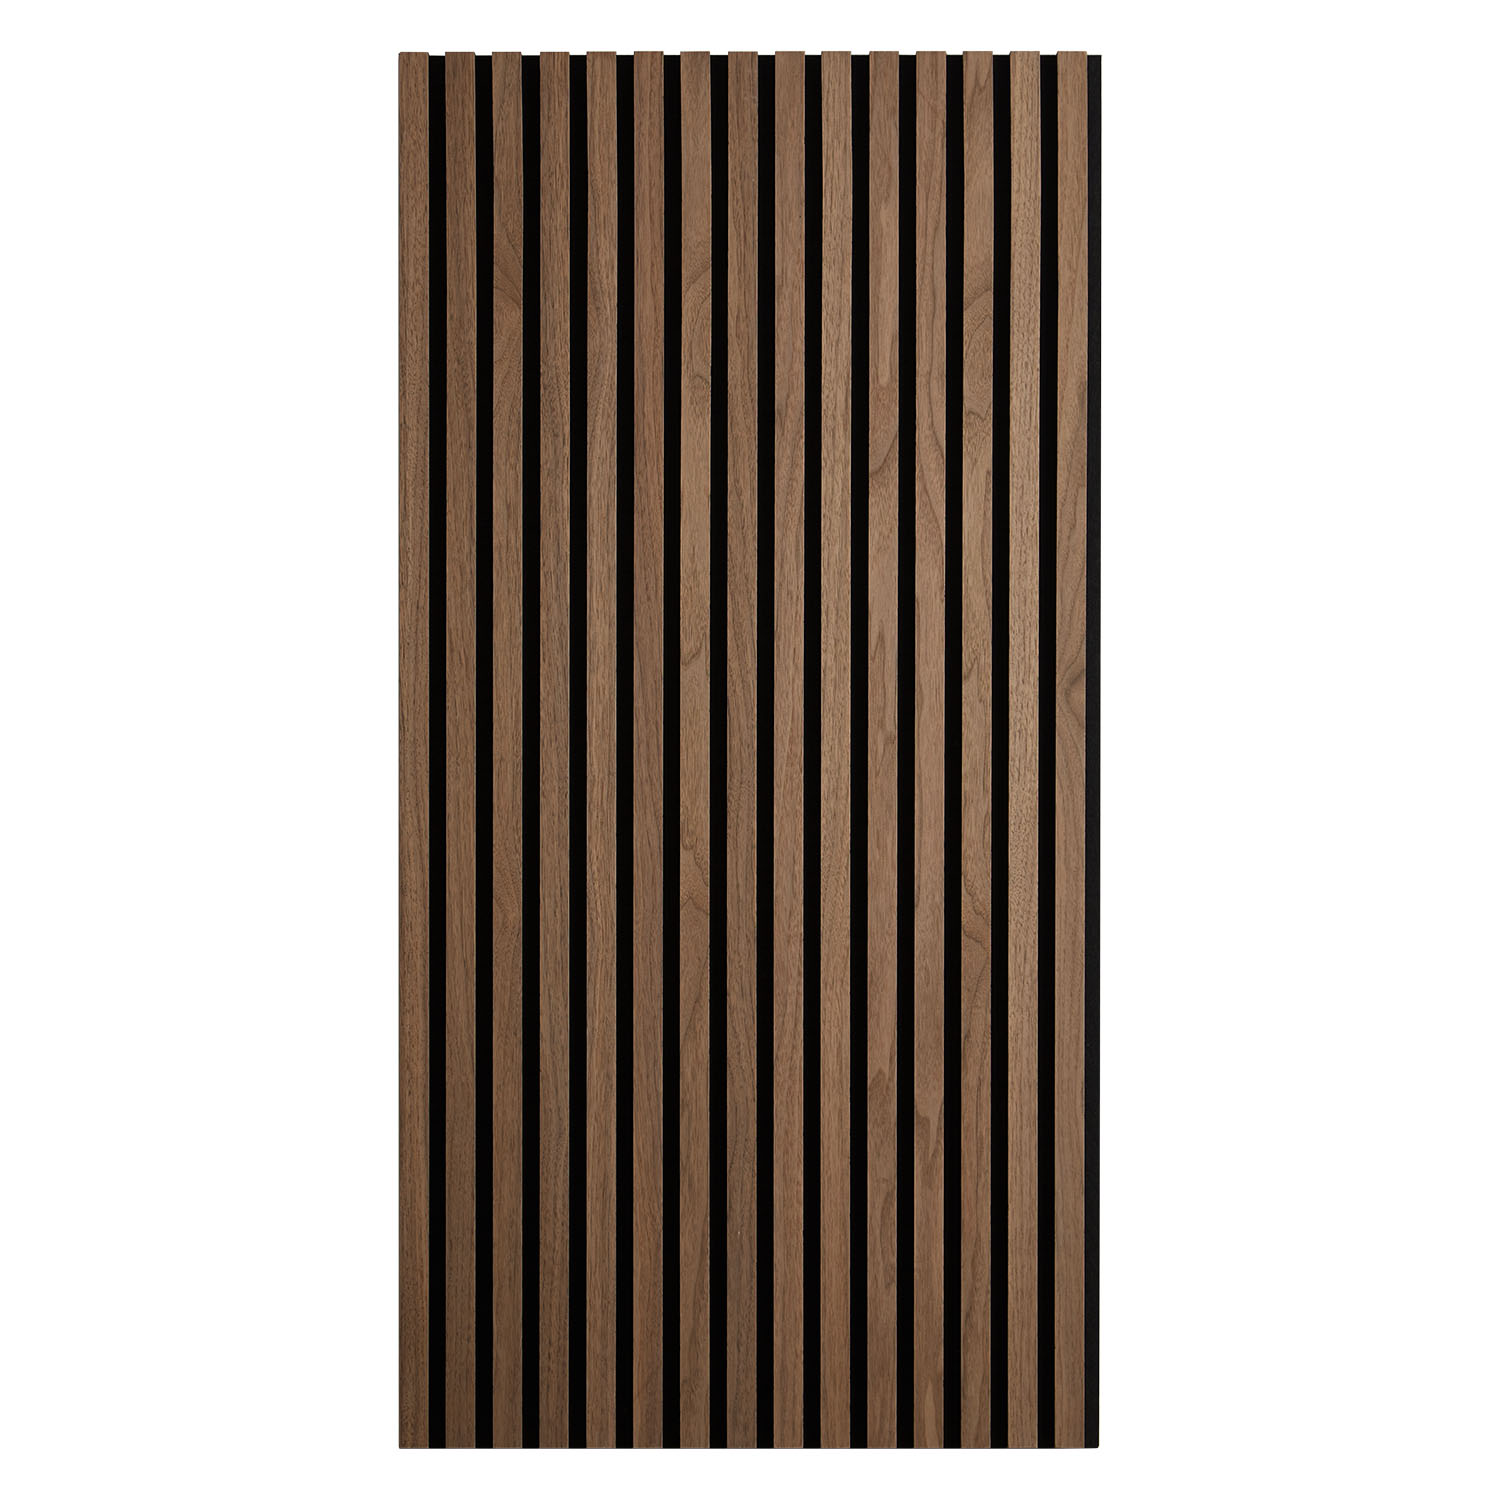 4 Wall panels 60 x 120 cm Brown Wood paneling for walls Acoustic panels Bedroom paneling Wall cladding Acoustic sound panels Sound proof panels